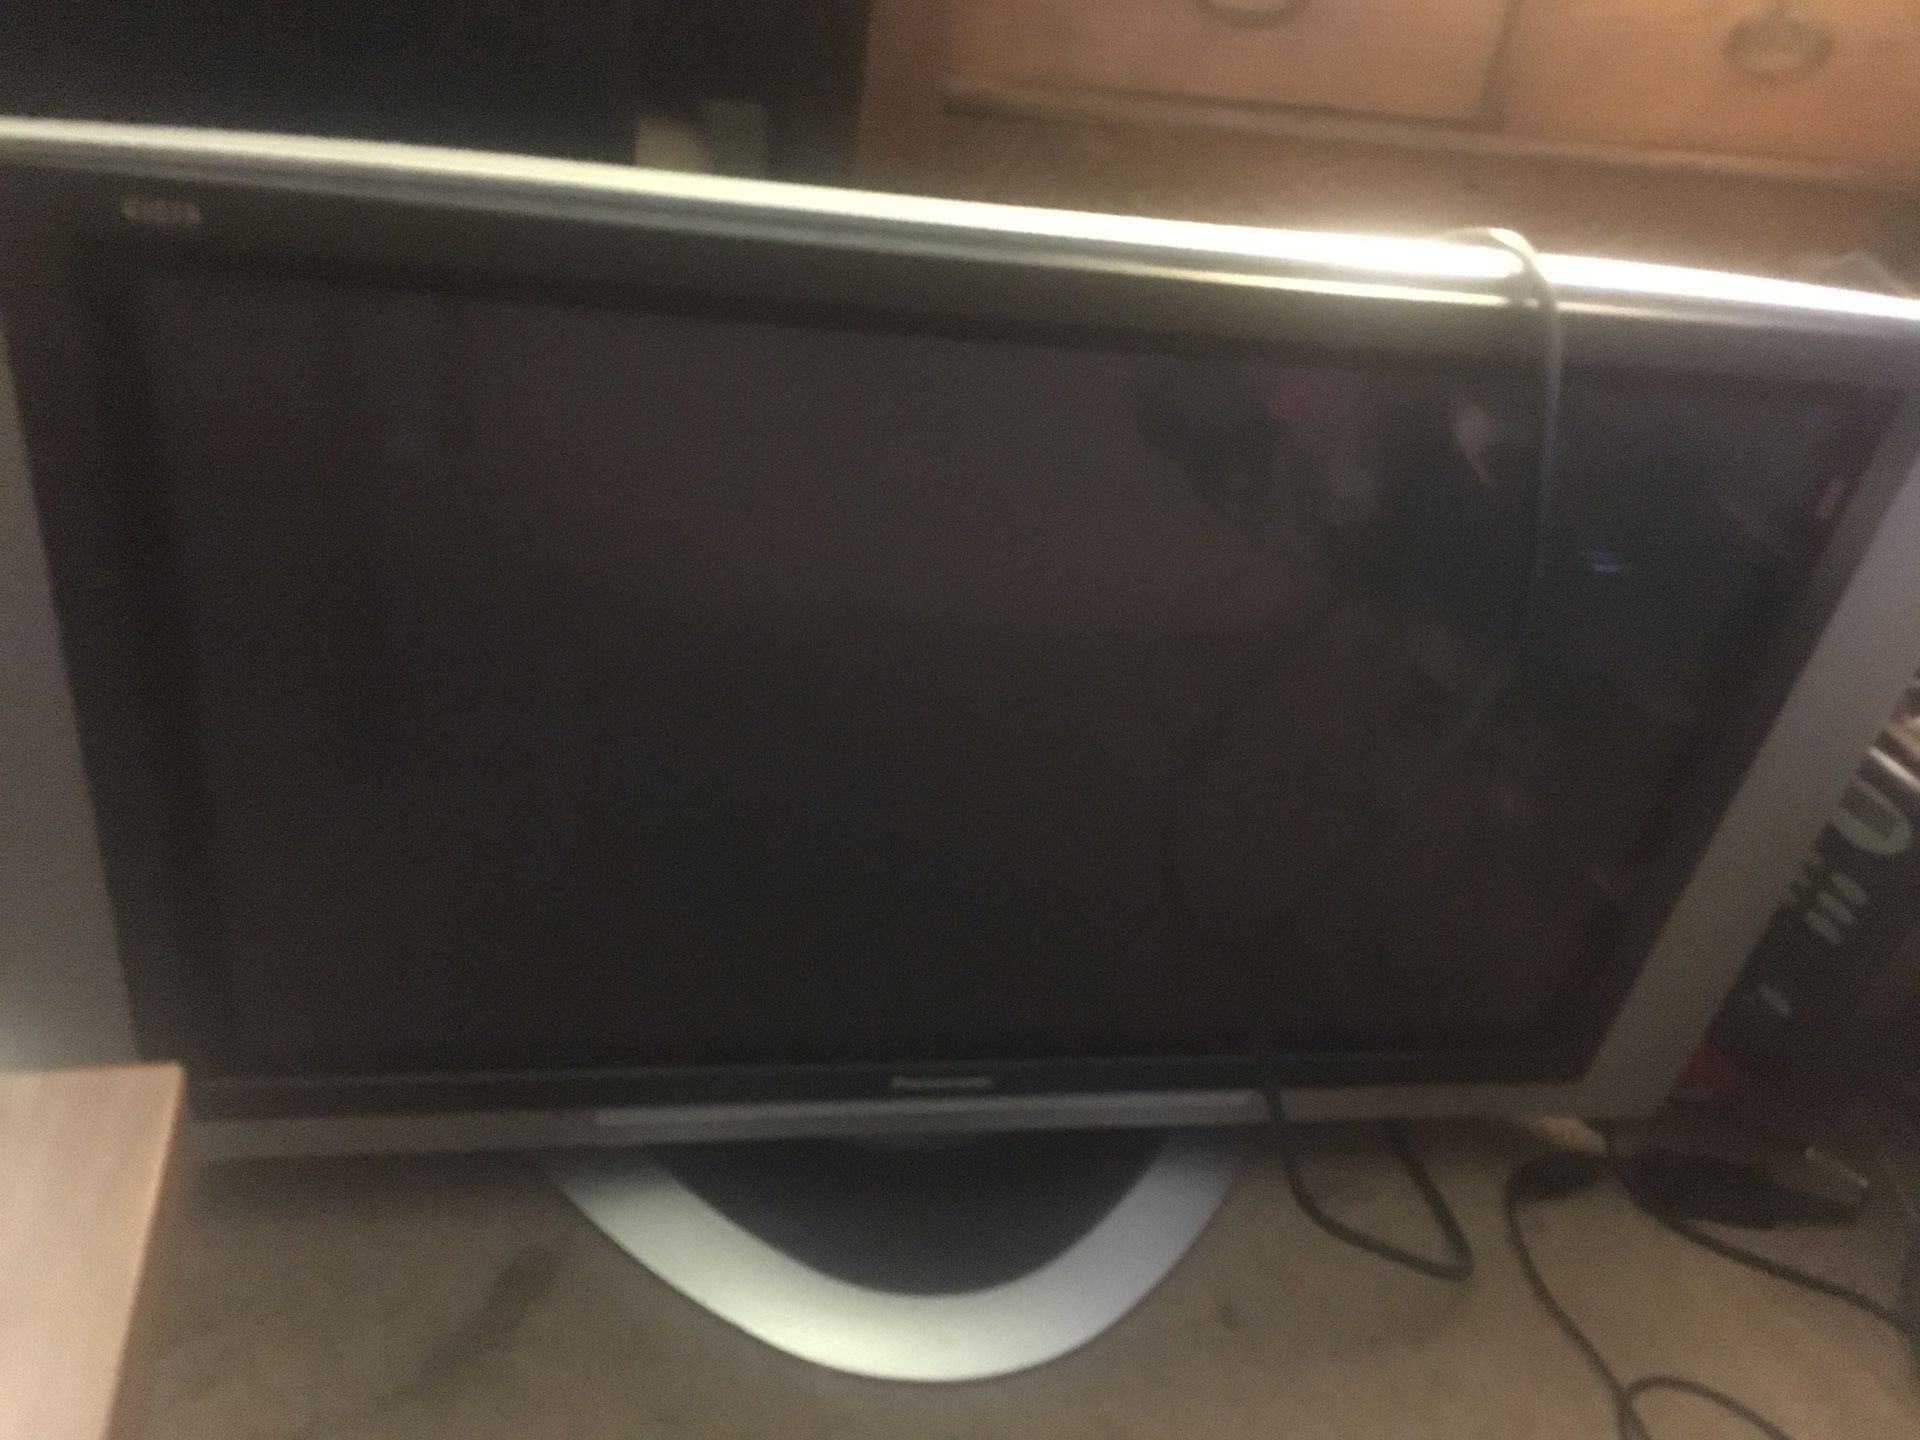 Panasonic 48” Tv with its remote control